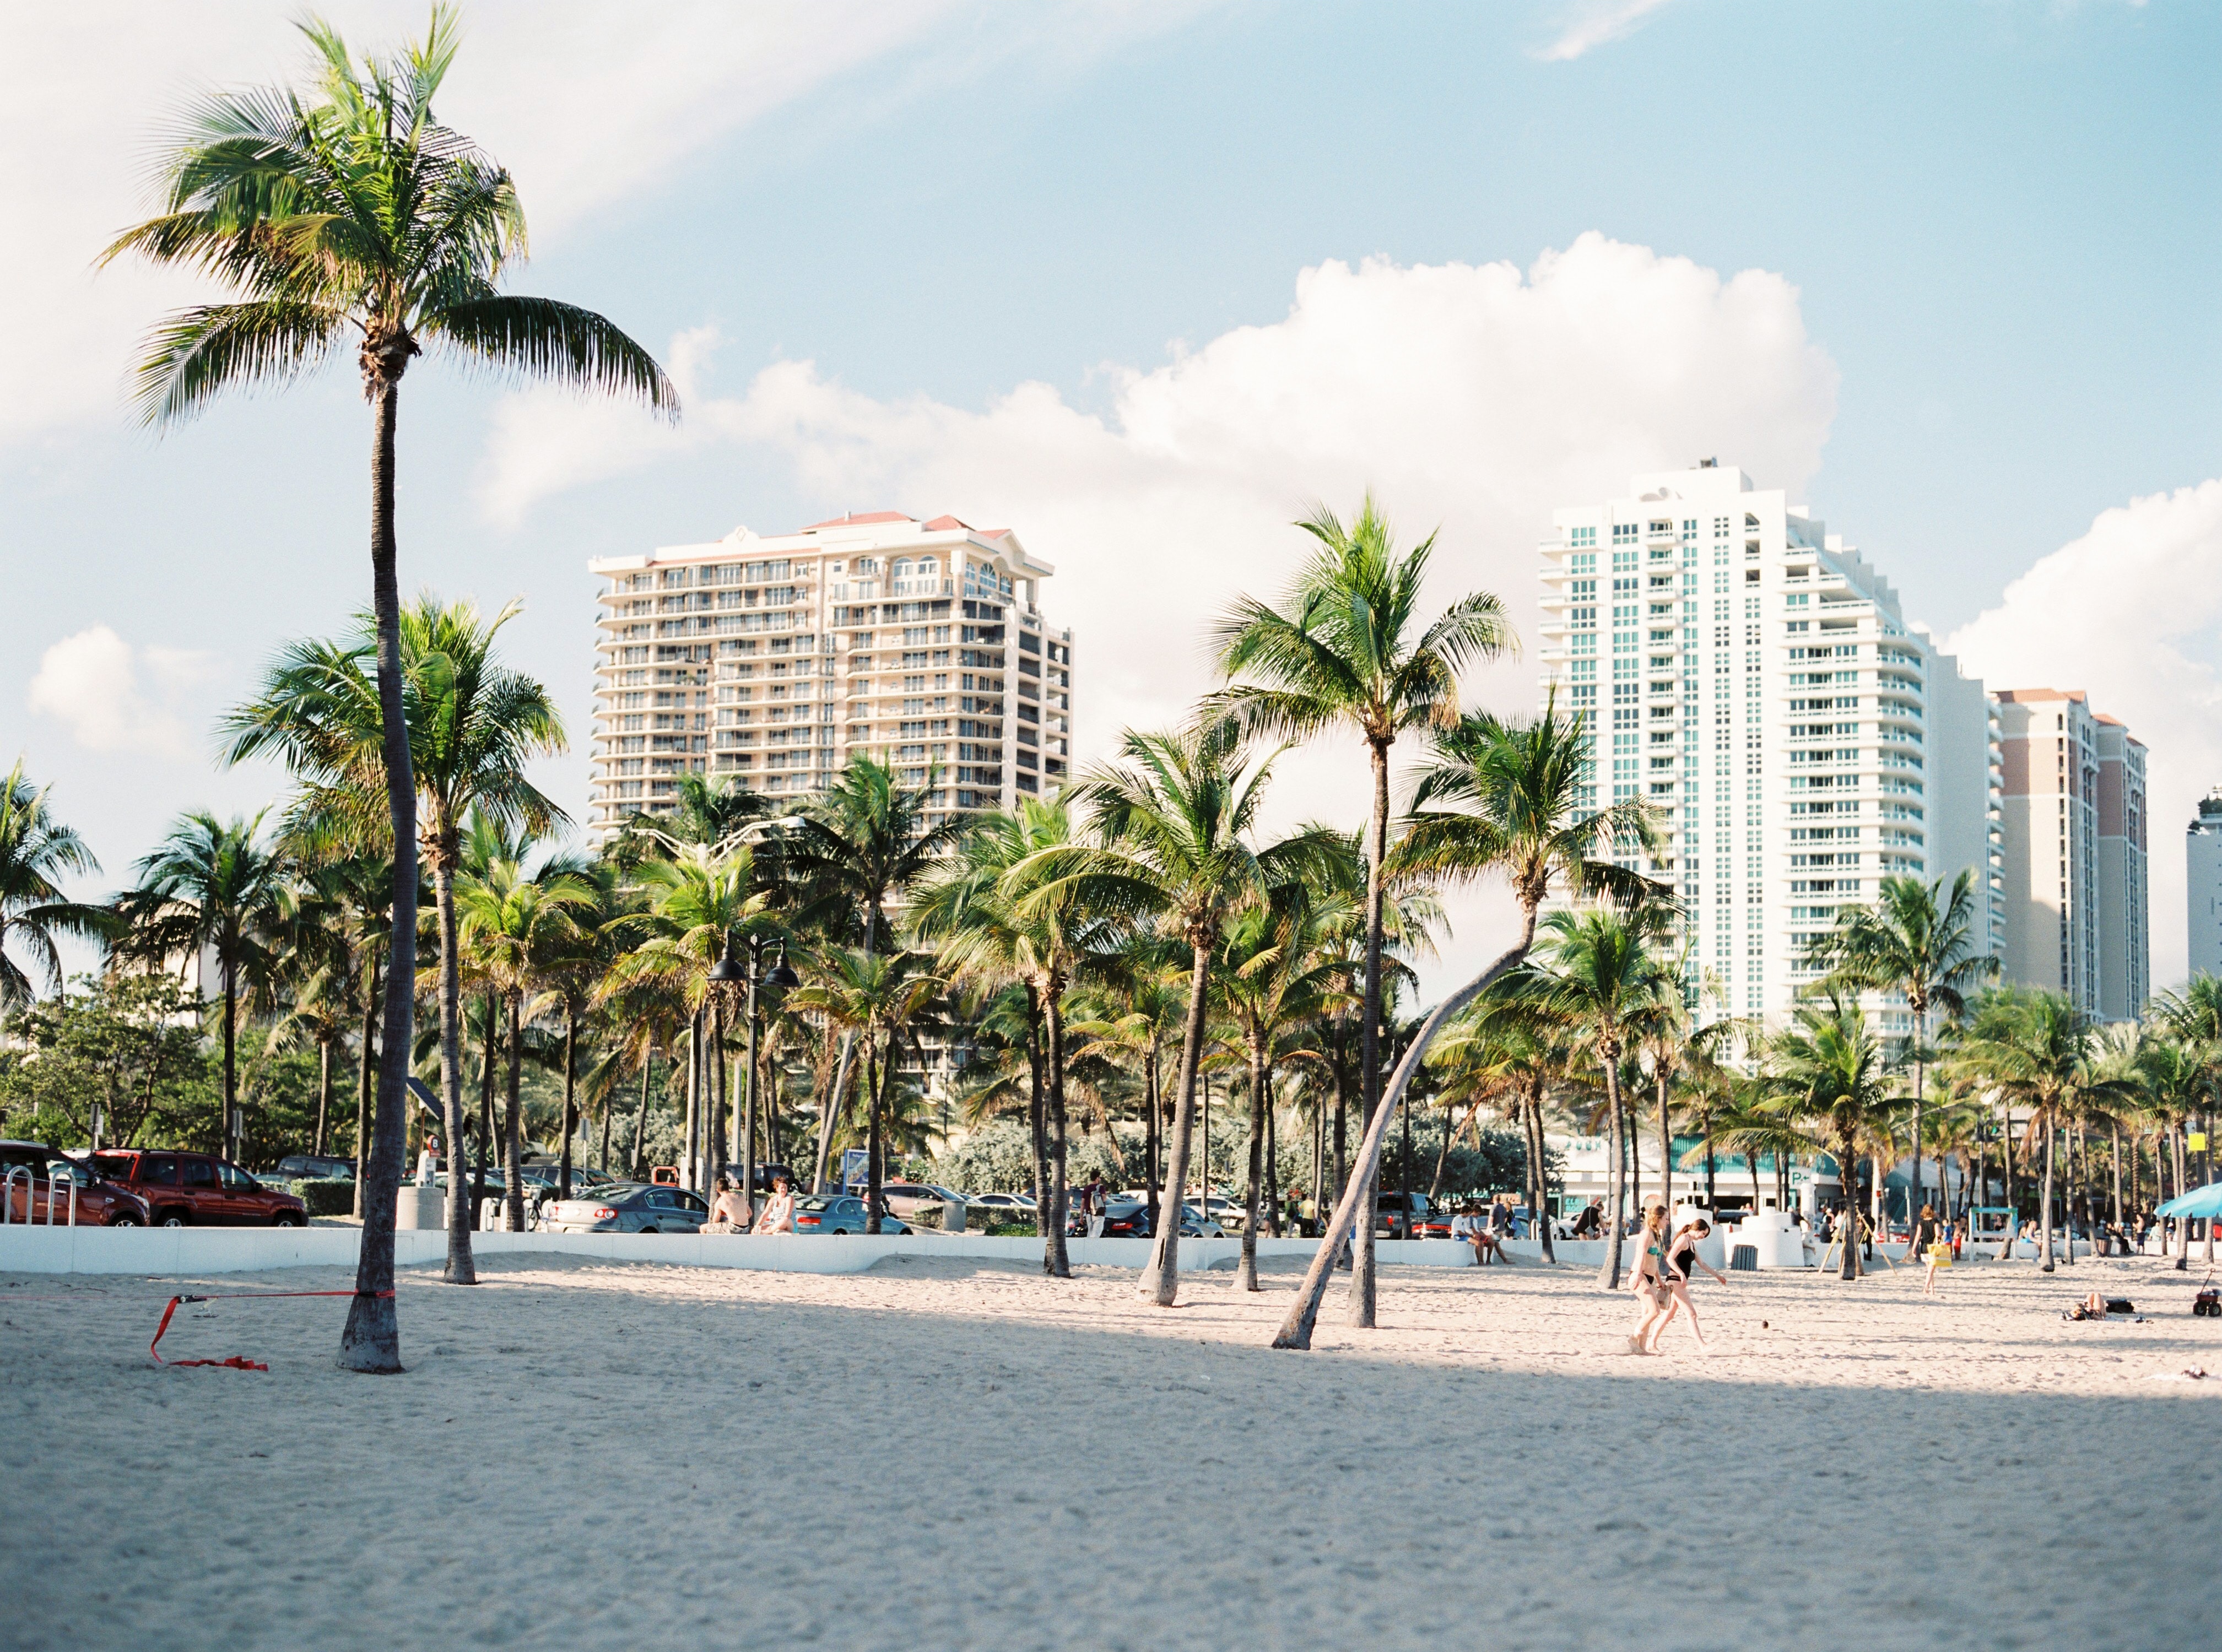 How To Throw The Best Miami Bachelorette Party (Without Having to Leave Your Hotel)